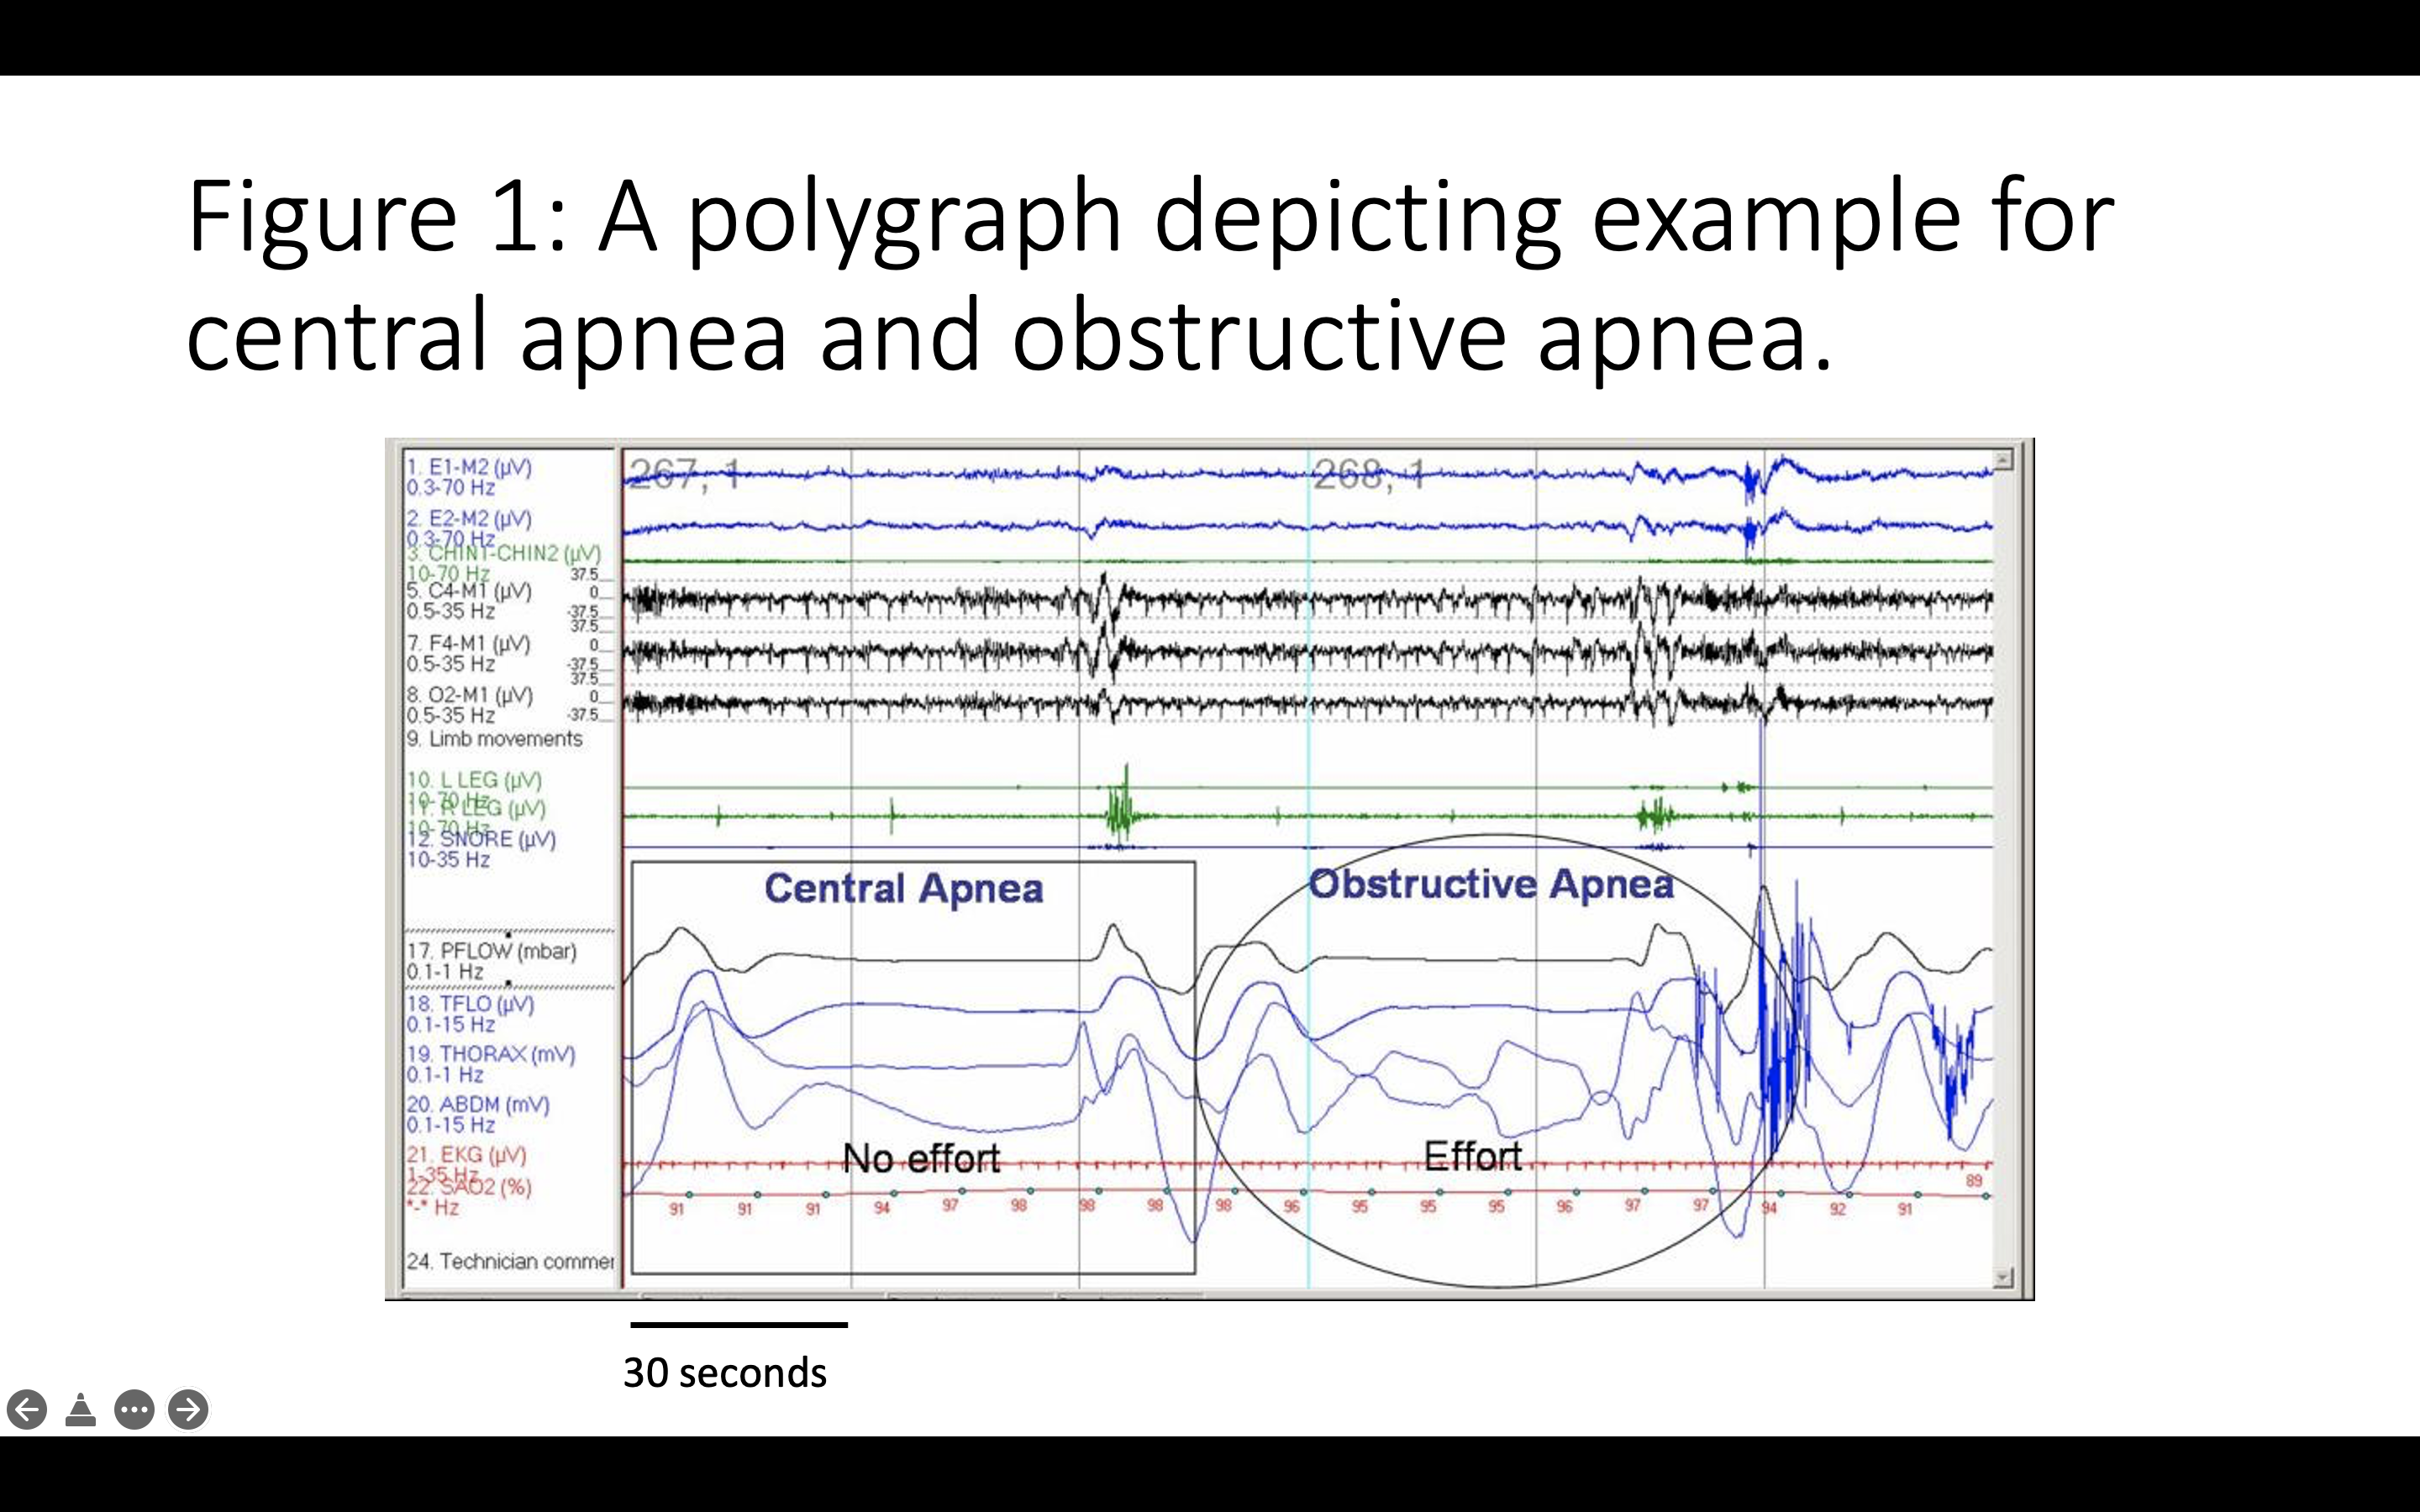 A polygraph depicting example of central and obstructive apnea.